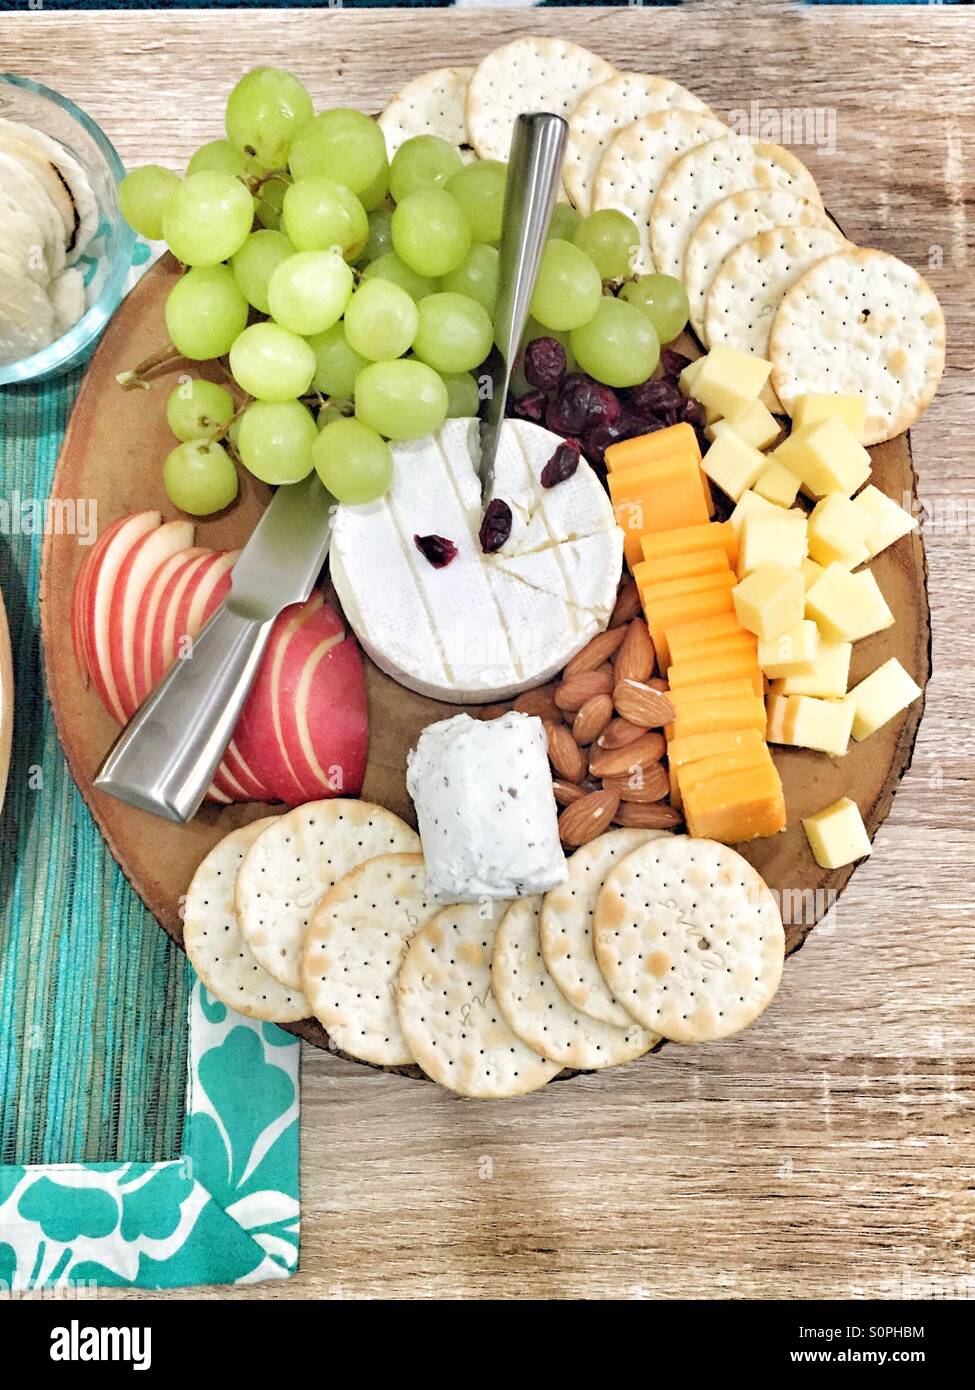 cheese and fruit platter Stock Photo